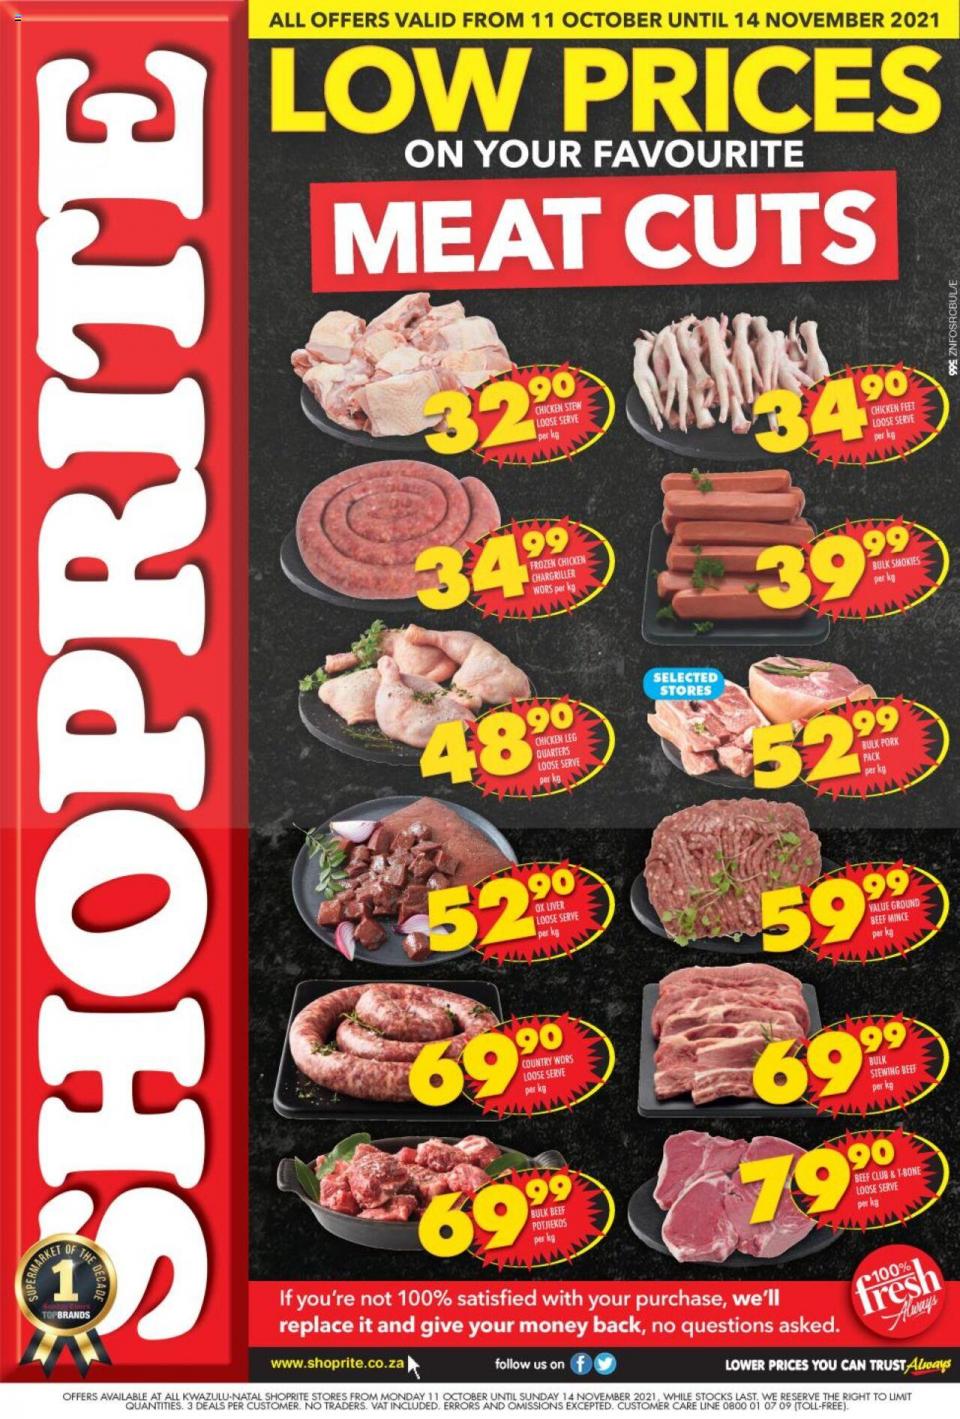 Shoprite Specials Low Prices on Meat Cuts 11 – 14 Nov 2021